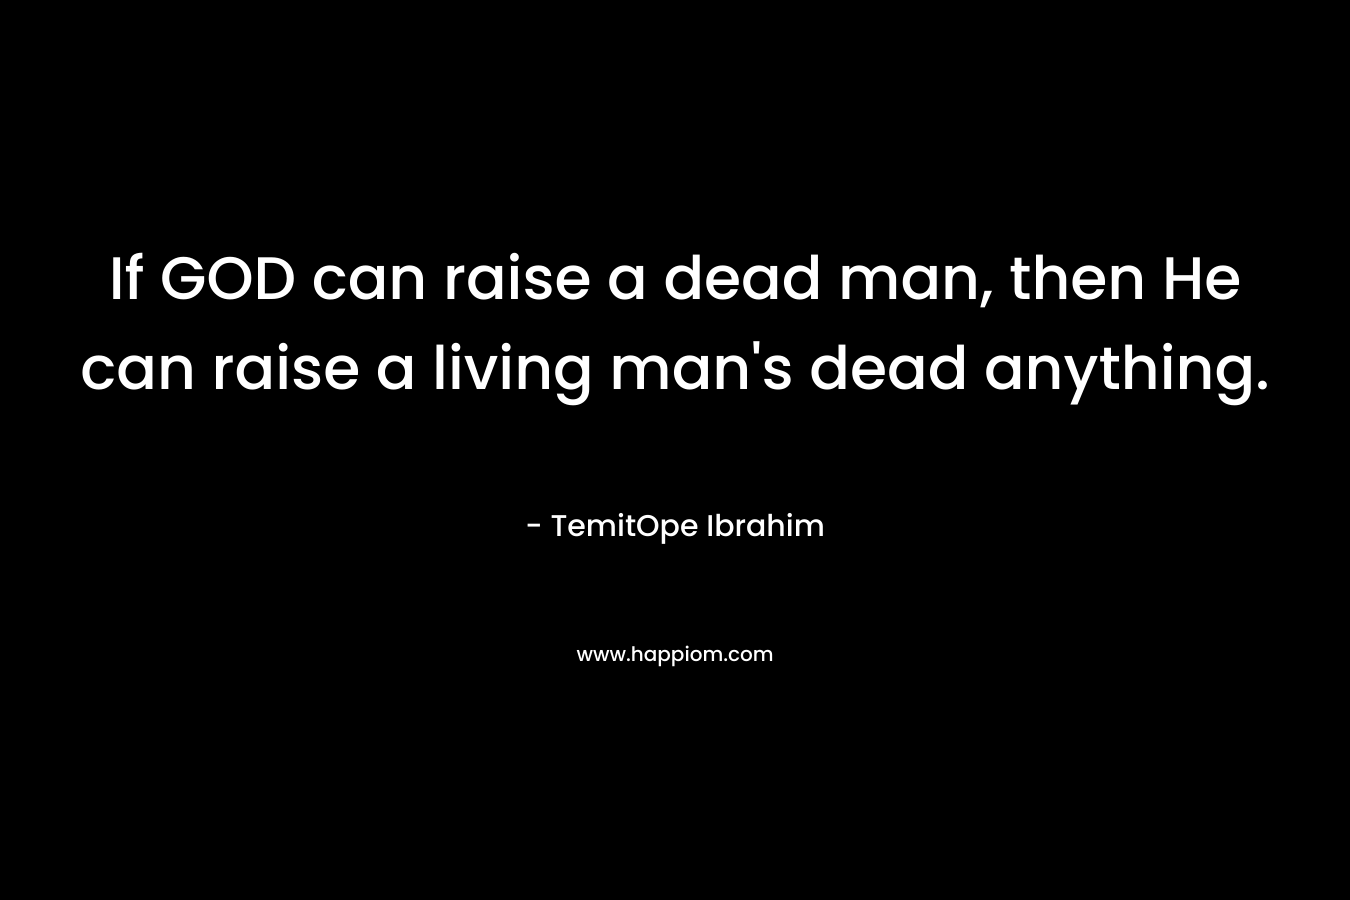 If GOD can raise a dead man, then He can raise a living man's dead anything.